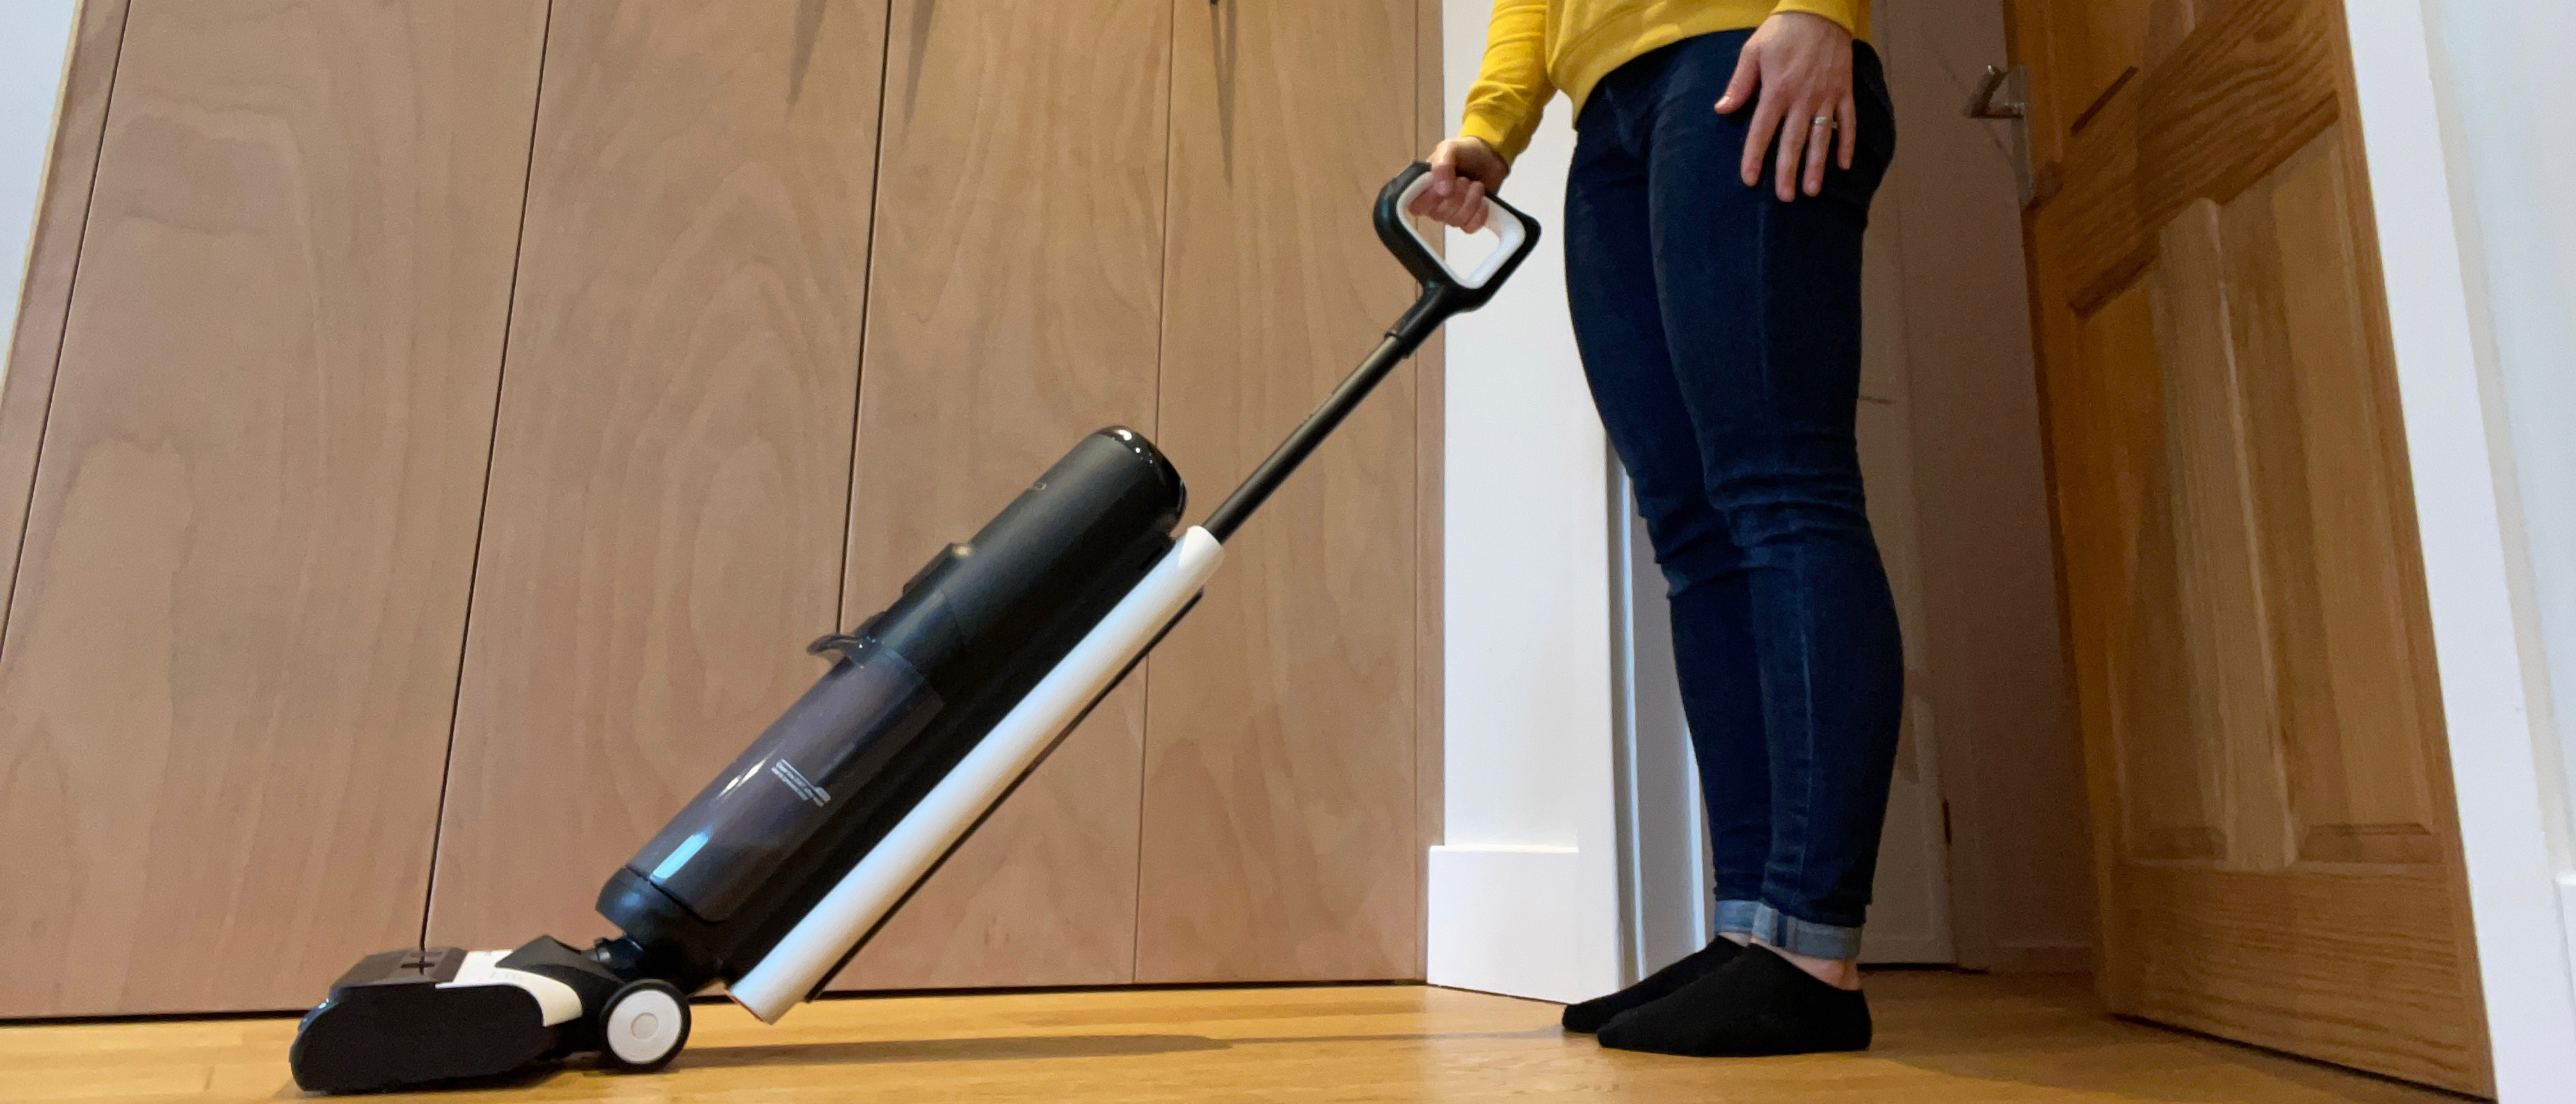 Tineco Floor One S3 Review: Can it replace your mop and vacuum? - Reviewed